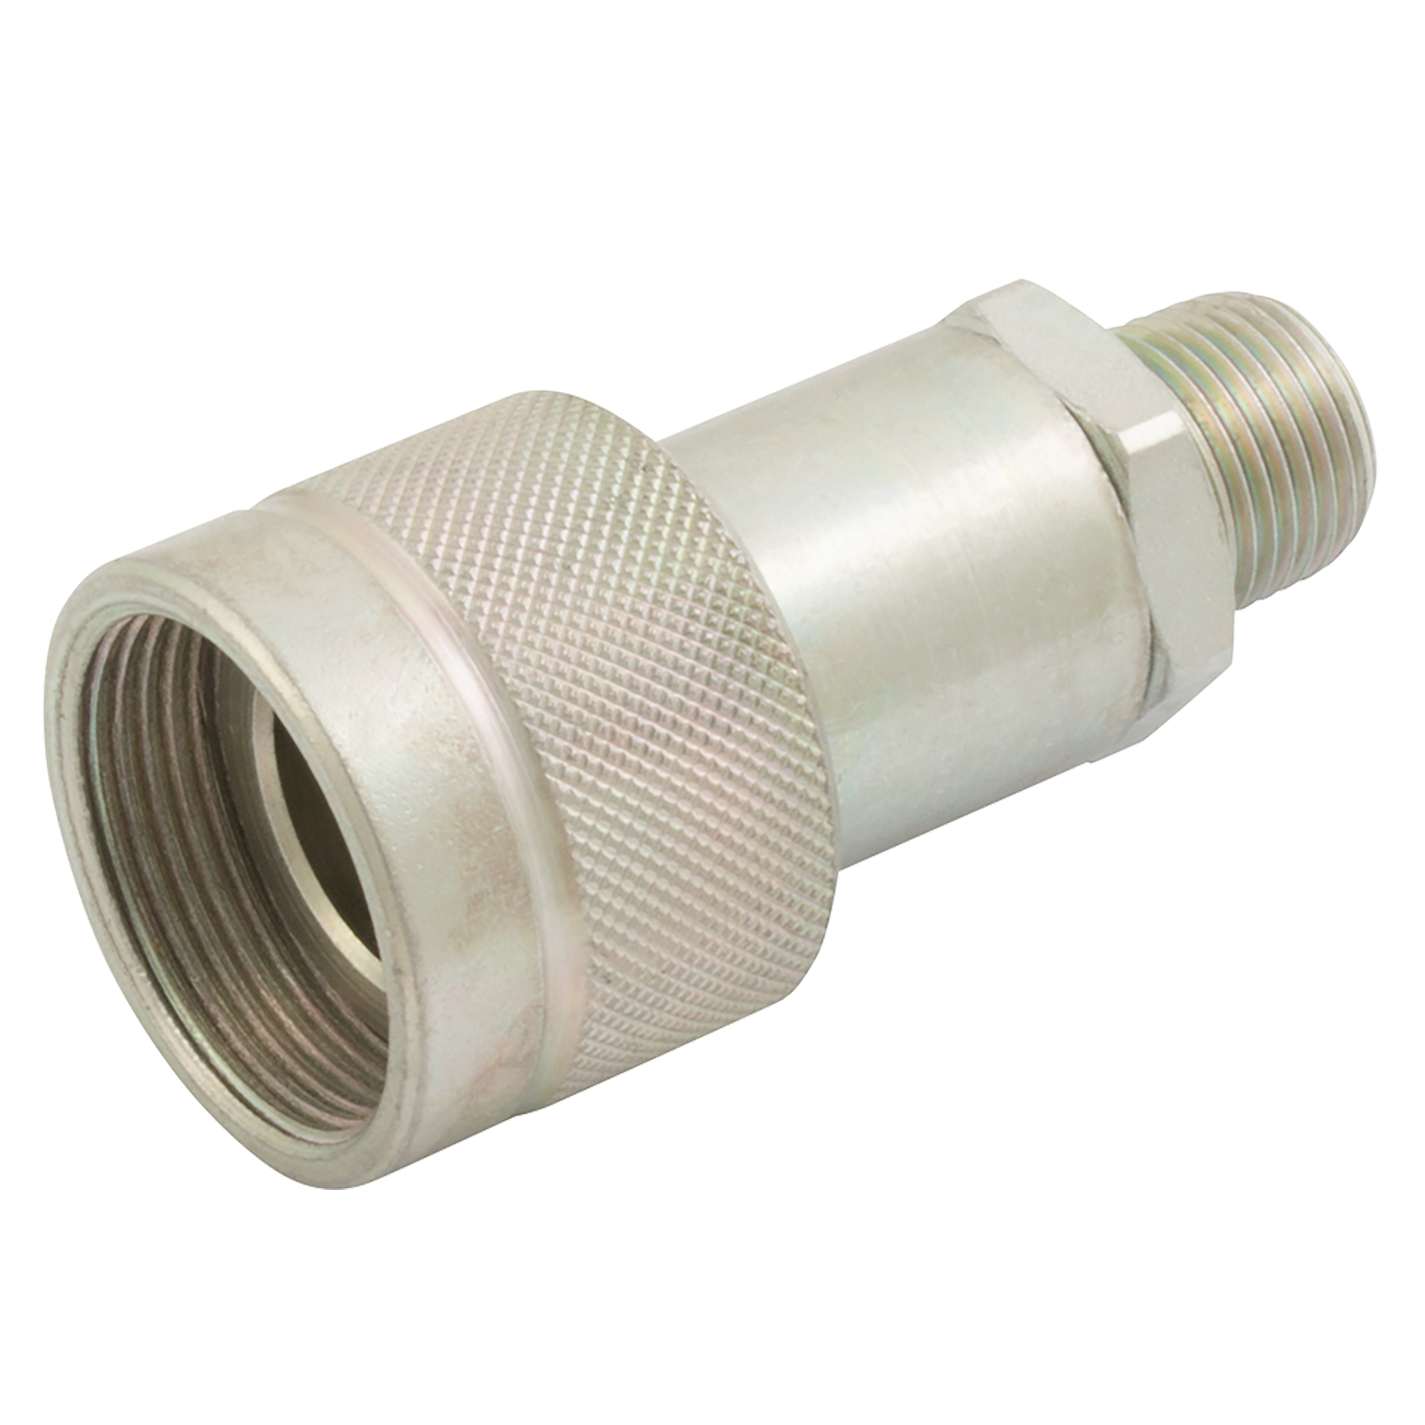 3/8" NPT Female Hydraulic Quick Release Coupling